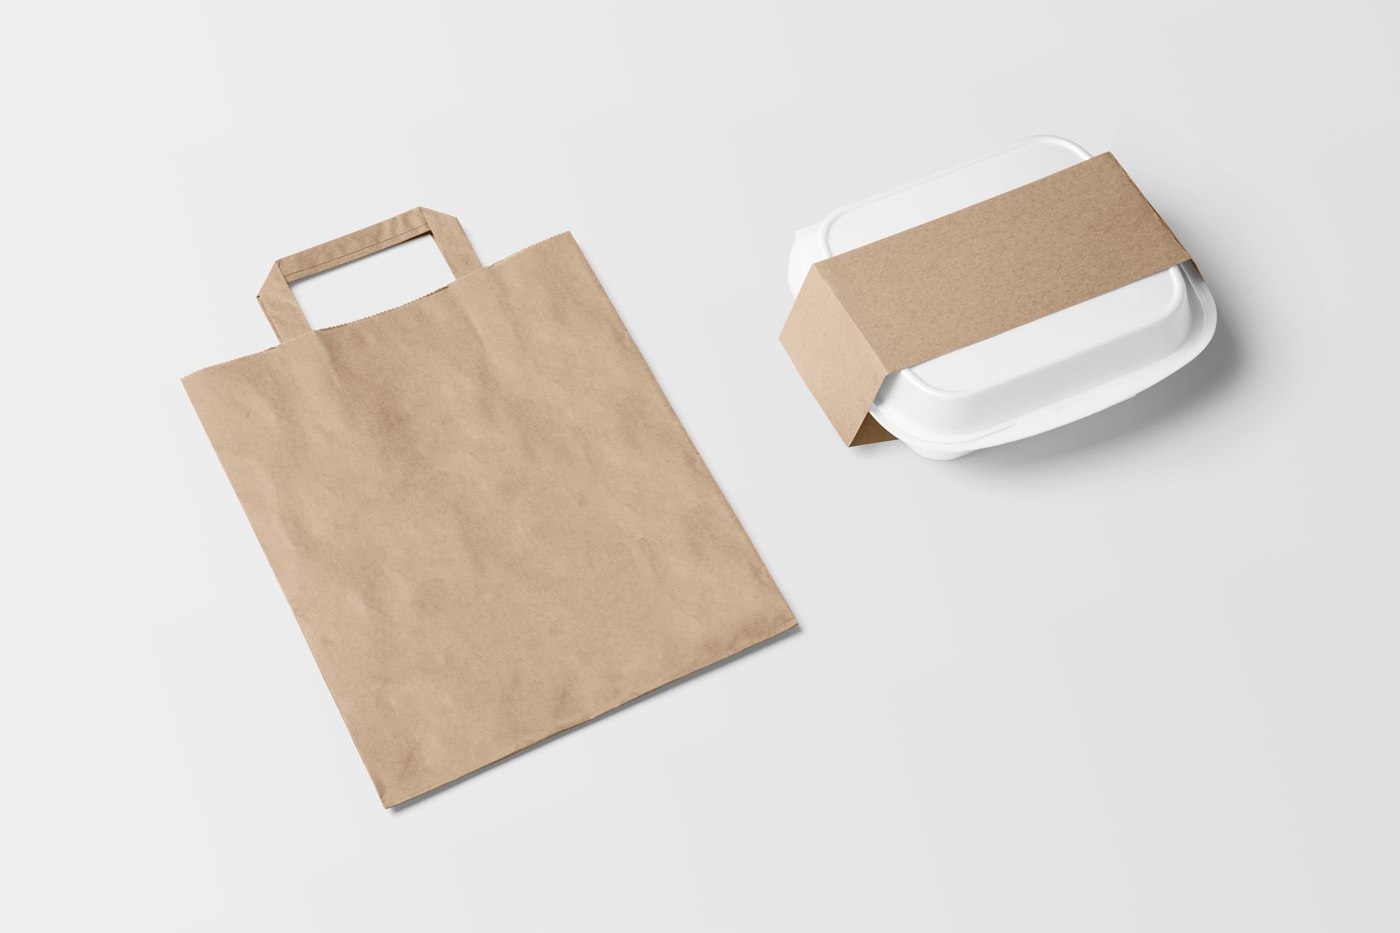 Top View of Packaging Box and Paper Bag Mockup FREE PSD